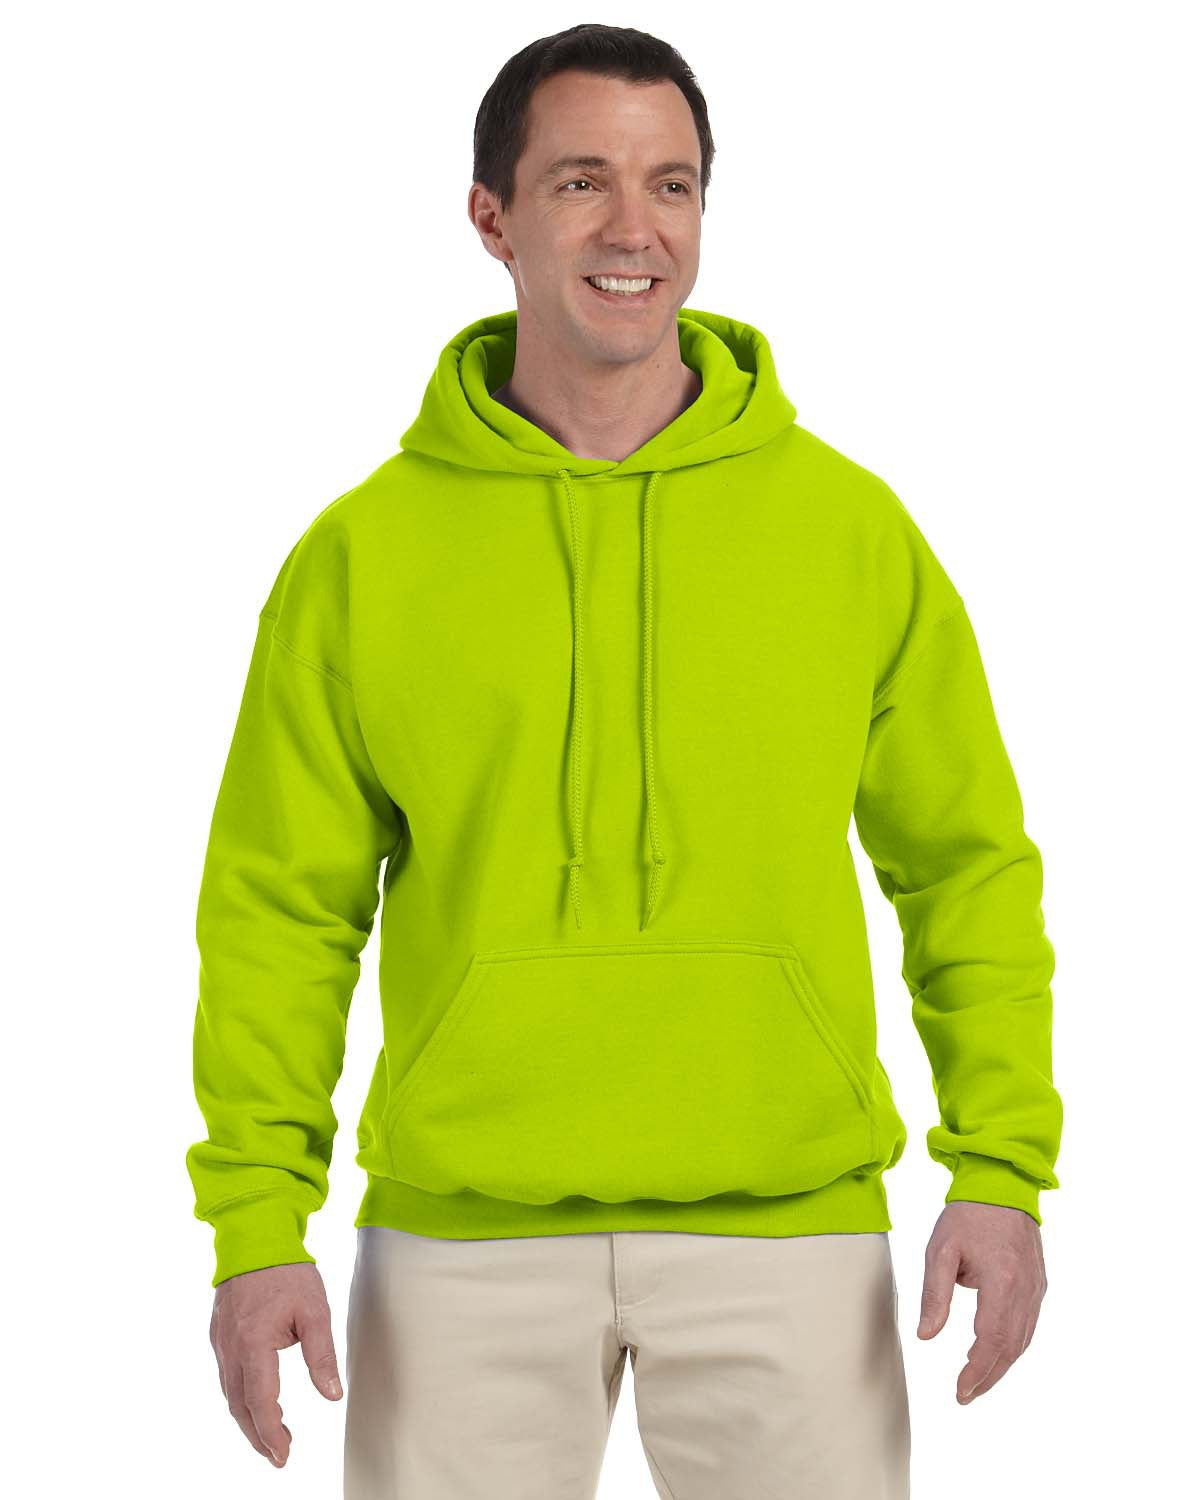 Adult Double Lined Hoodie with Pouch Pocket - shoppe list